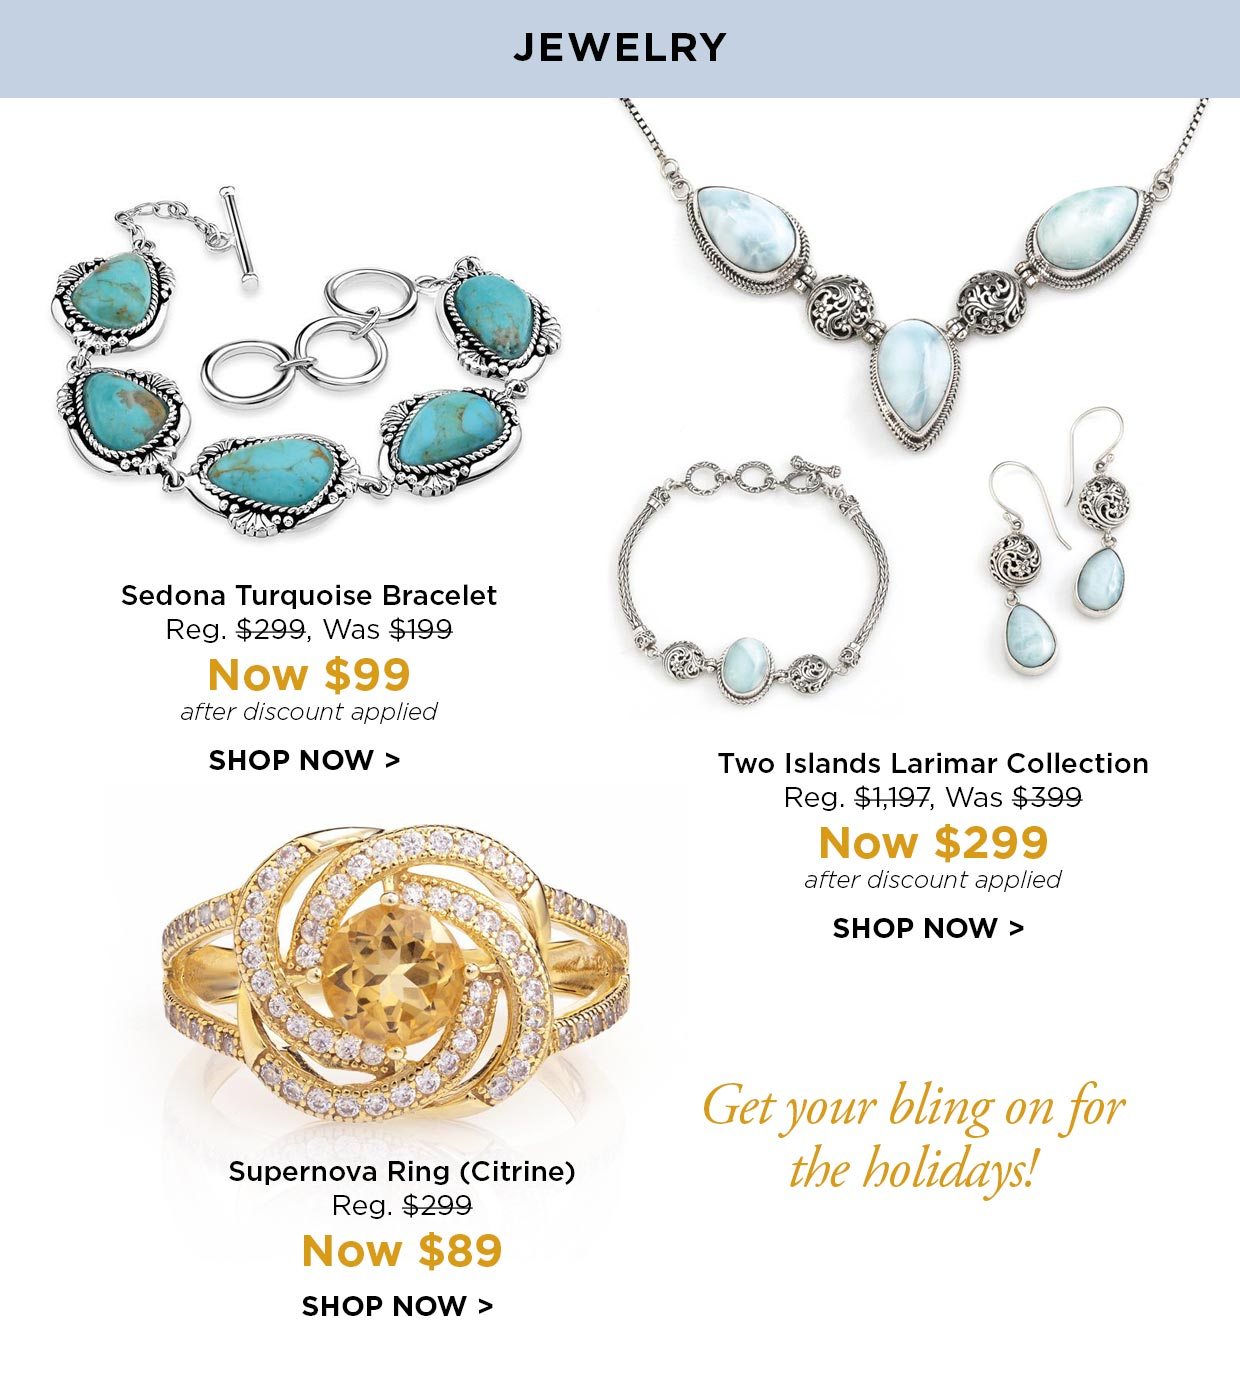 JEWELRY. Sedona Turquoise Bracelet Reg. $299, Was $199, Now $99 after discount applied. Two Islands Larimar Collection Reg. $1,197, Was $399, Now $299 after discount applied. Supernova Ring (Citrine) Reg. $299, Now $89 SHOP NOW. Get your bling on for the holidays!